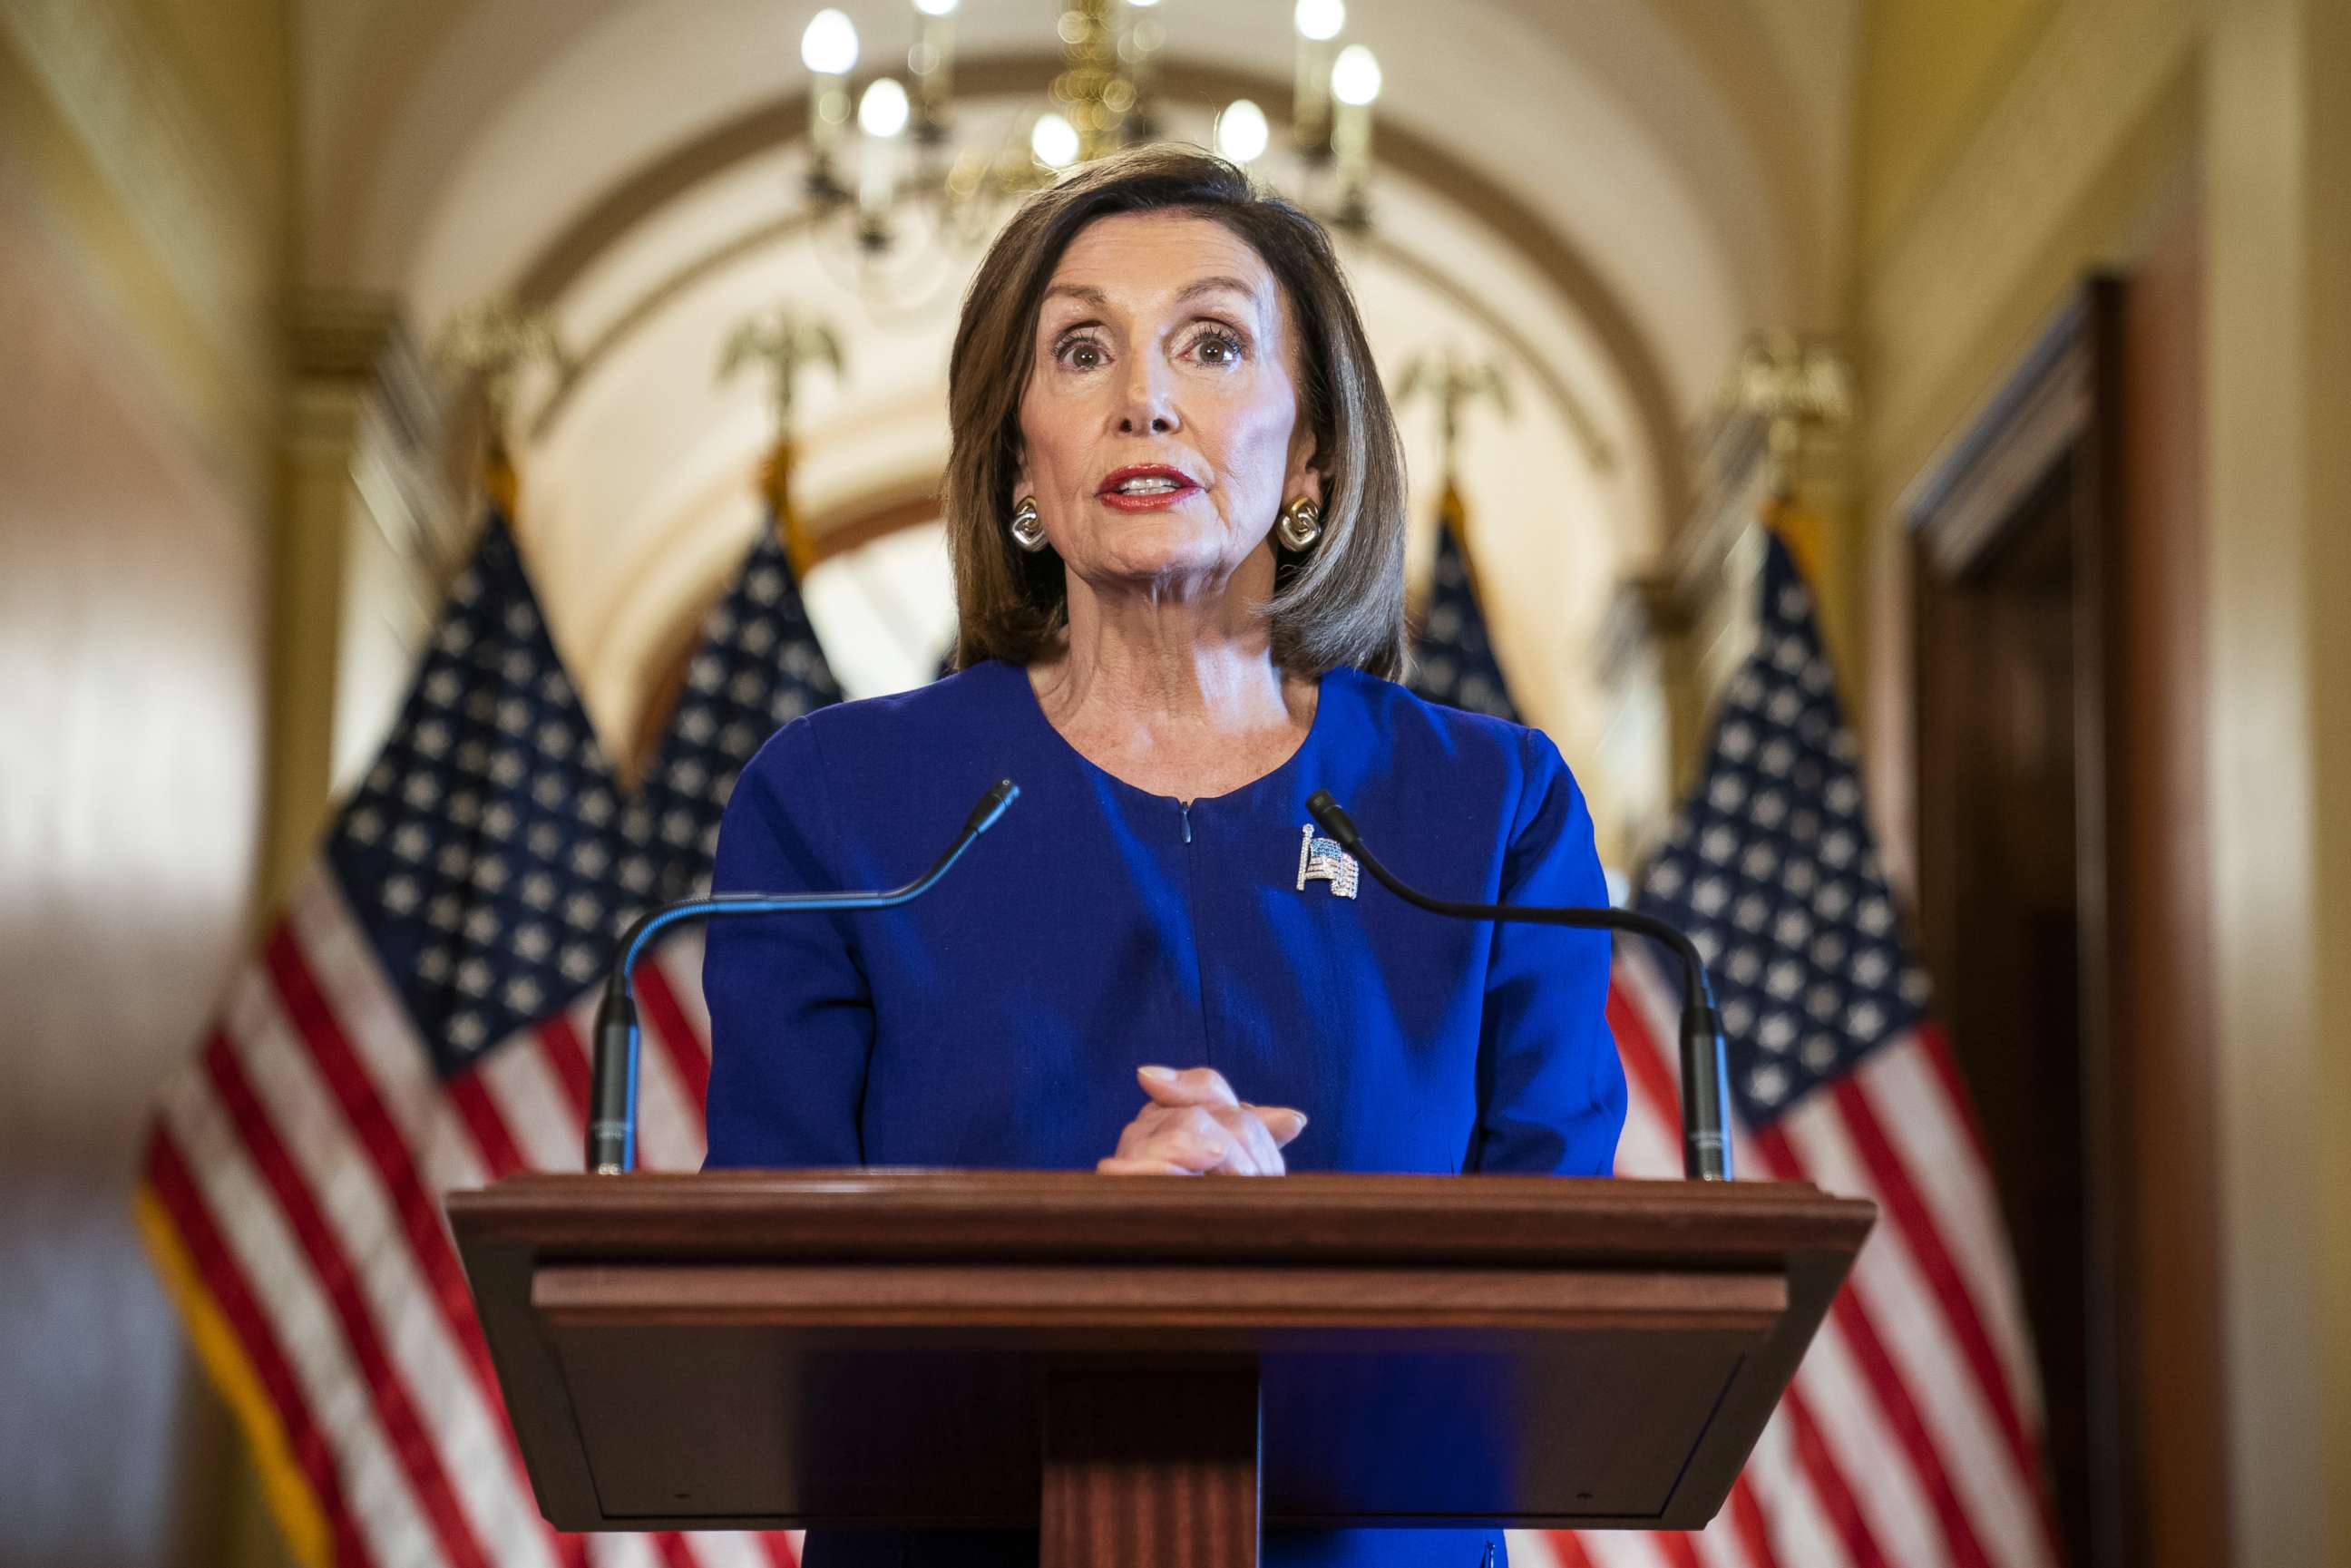 PHOTO: U.S. House Speaker Nancy Pelosi, a Democrat from California, speaks during a news conference at the U.S. Capitol in Washington, D.C., Sept. 24, 2019.